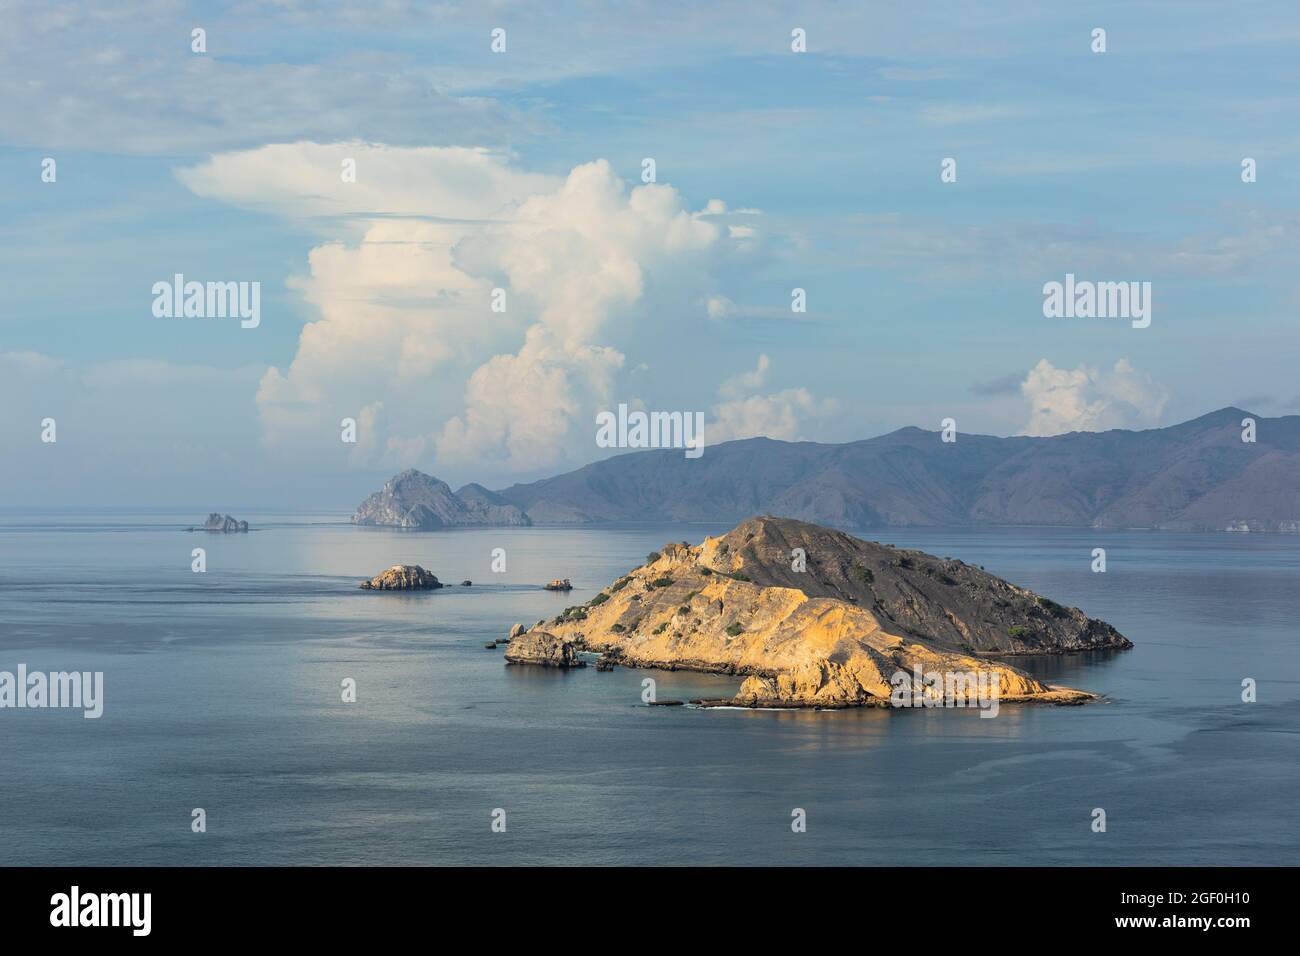 View of one of the Komodo islands Stock Photo